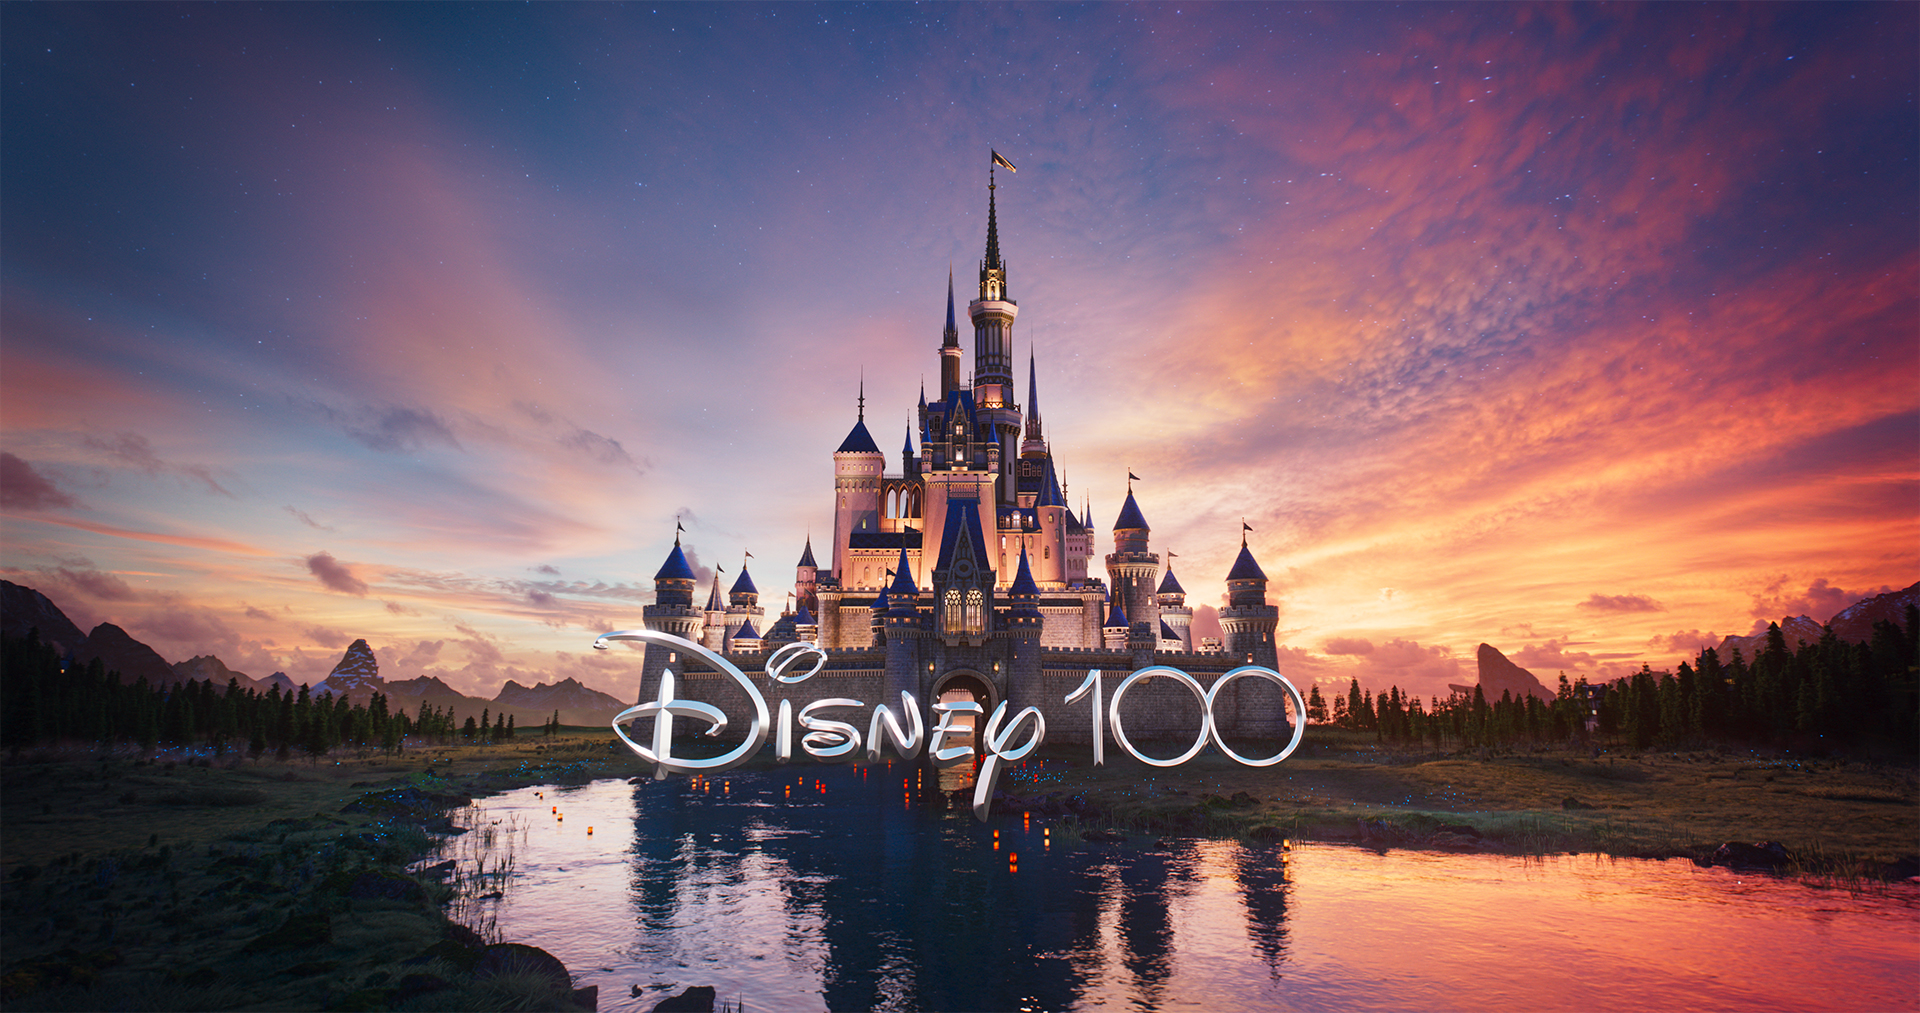 Wish' tickets on sale now as Disney celebrates 100-year anniversary